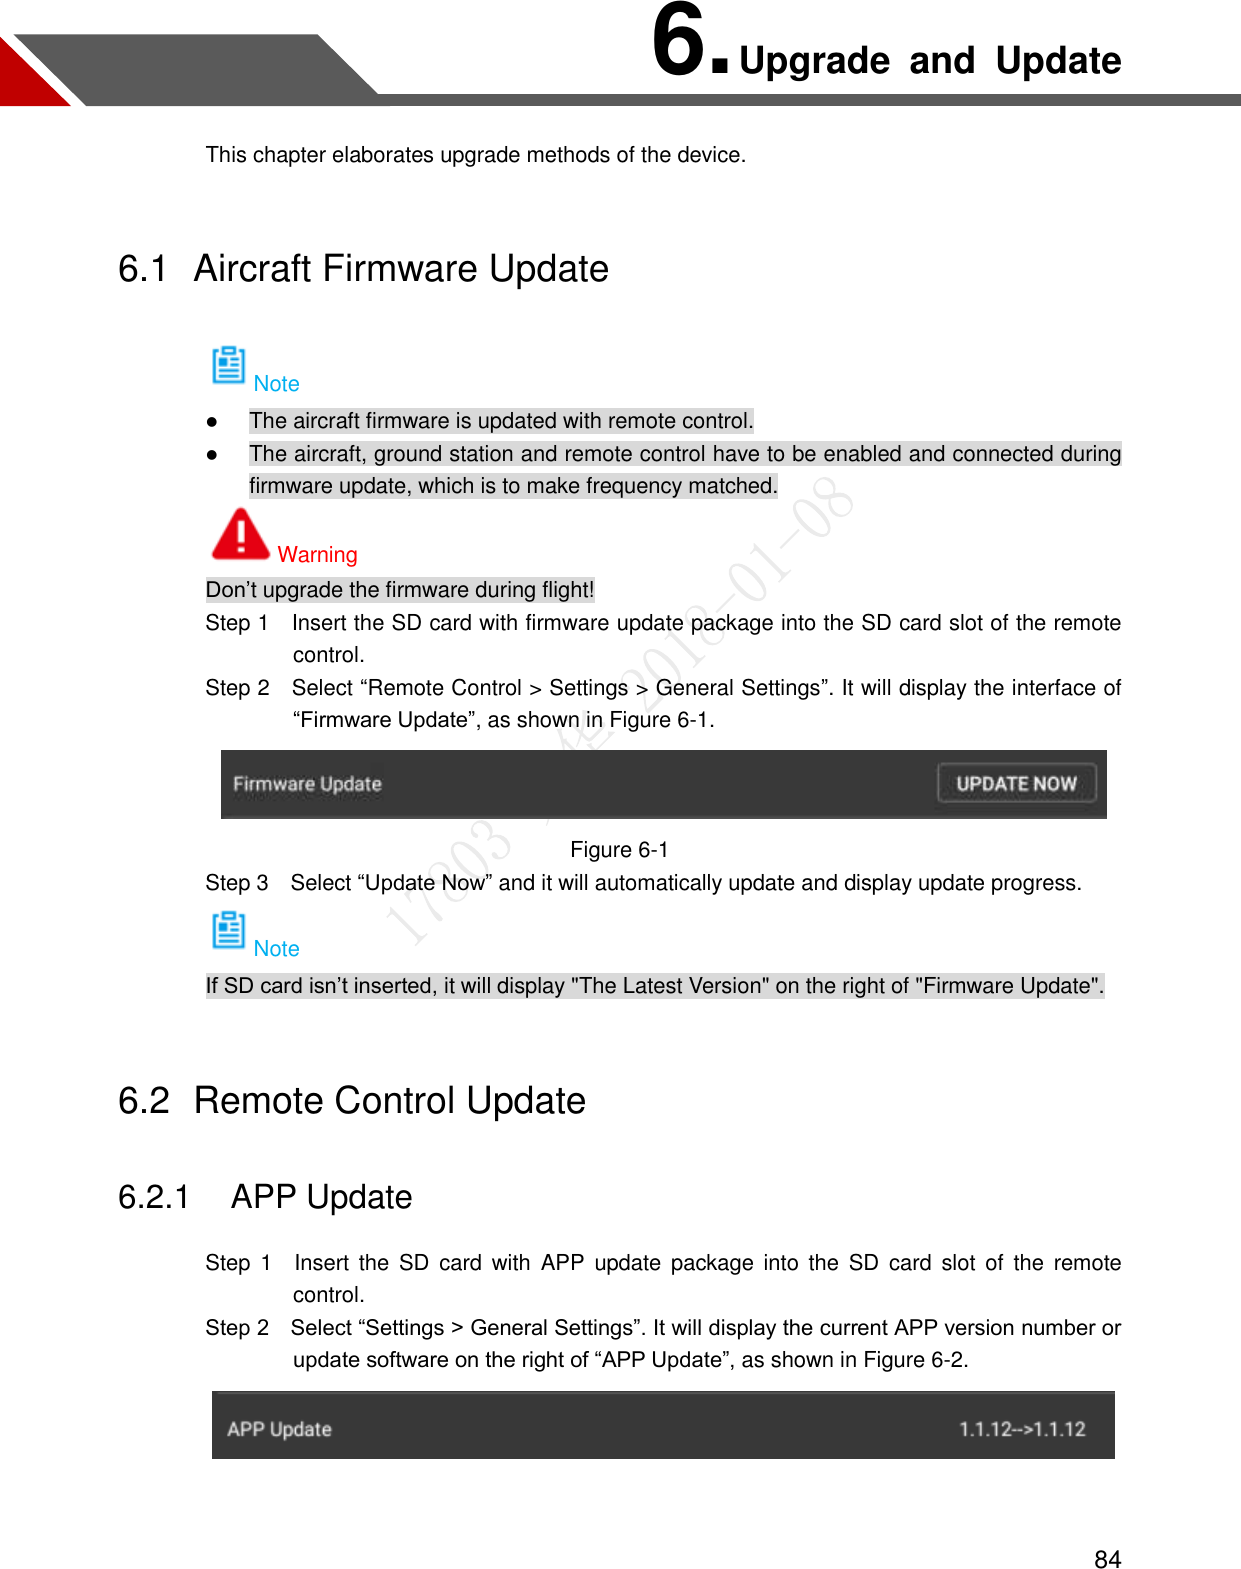  84 6. Upgrade  and  Update This chapter elaborates upgrade methods of the device. 6.1  Aircraft Firmware Update Note  The aircraft firmware is updated with remote control.  The aircraft, ground station and remote control have to be enabled and connected during firmware update, which is to make frequency matched. Warning Don’t upgrade the firmware during flight!                 Step 1    Insert the SD card with firmware update package into the SD card slot of the remote control.                 Step 2  Select “Remote Control &gt; Settings &gt; General Settings”. It will display the interface of “Firmware Update”, as shown in Figure 6-1.  Figure 6-1                 Step 3    Select “Update Now” and it will automatically update and display update progress. Note If SD card isn’t inserted, it will display &quot;The Latest Version&quot; on the right of &quot;Firmware Update&quot;. 6.2  Remote Control Update 6.2.1 APP Update                 Step  1    Insert  the  SD  card  with  APP  update package into  the  SD  card  slot  of  the  remote control.         Step 2    Select “Settings &gt; General Settings”. It will display the current APP version number or update software on the right of “APP Update”, as shown in Figure 6-2.   